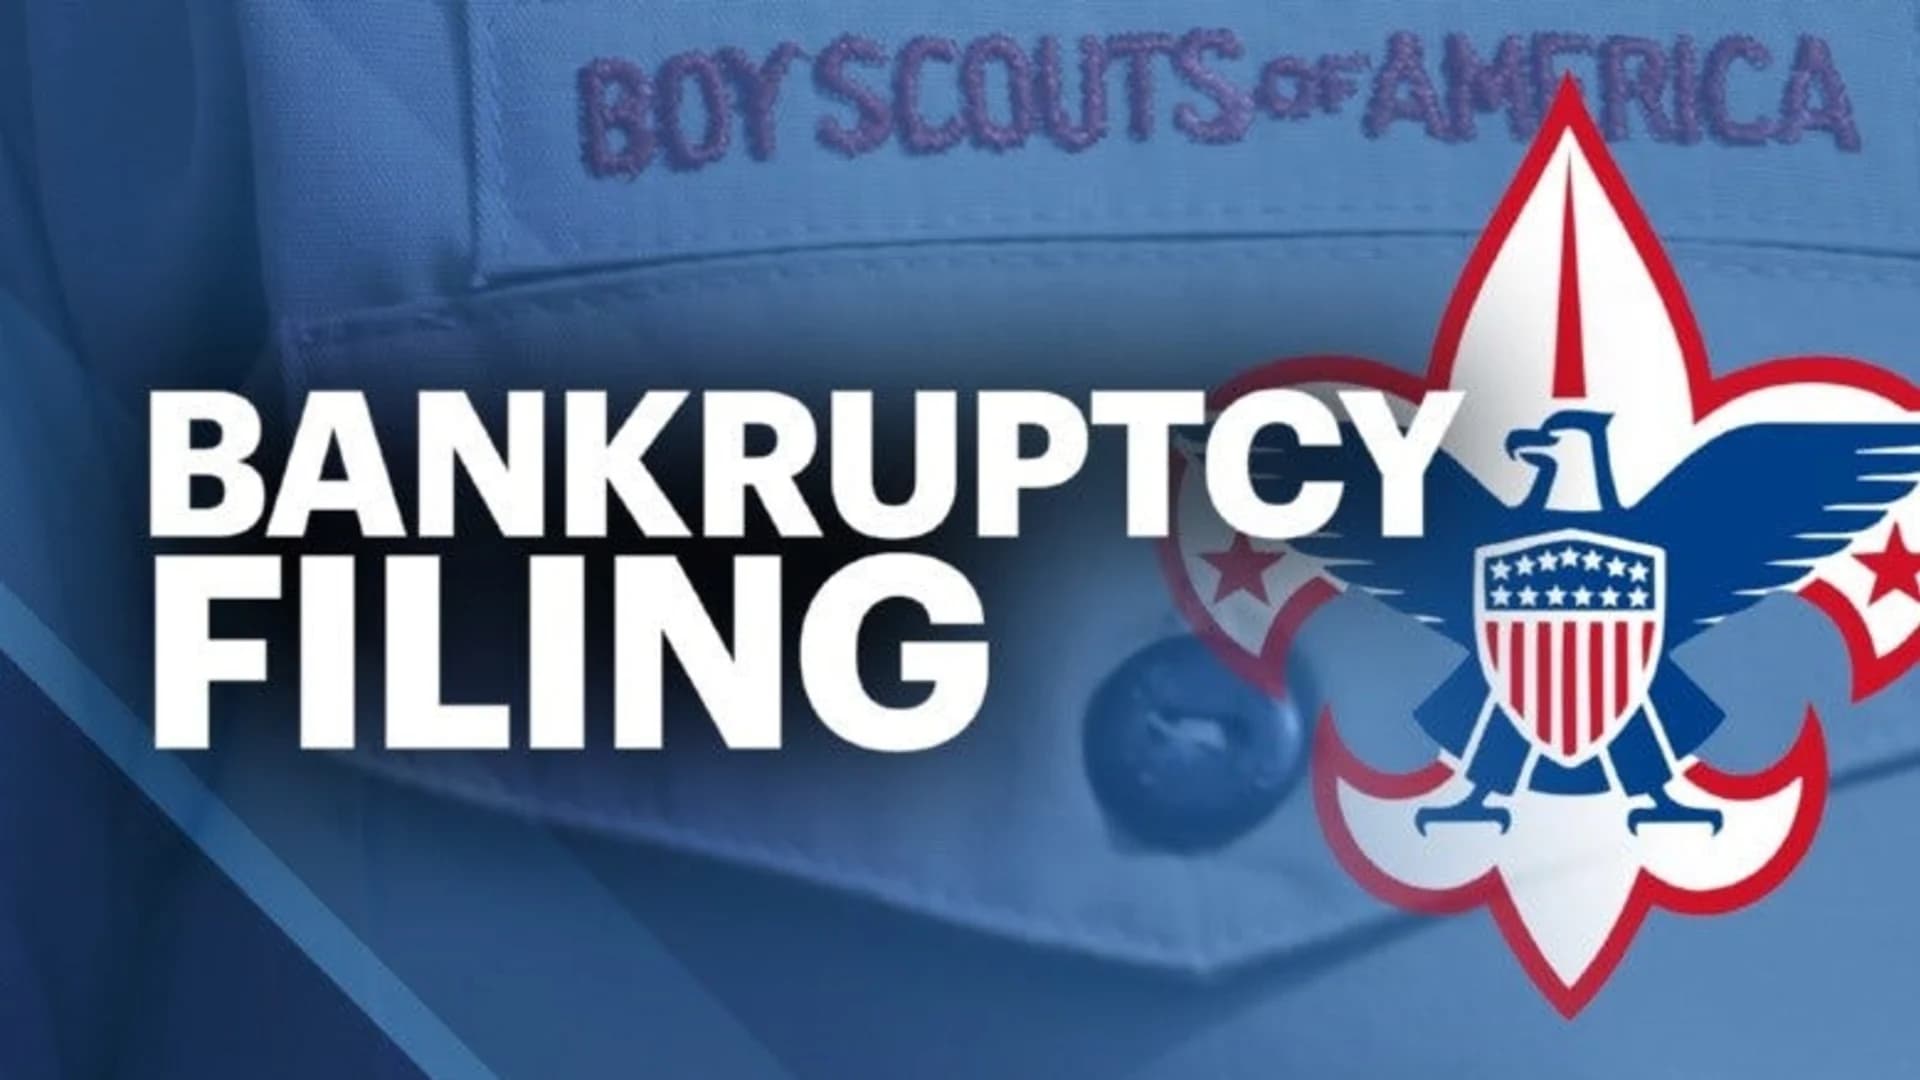 Boy Scouts file for bankruptcy protection following hundreds of sex abuse lawsuits